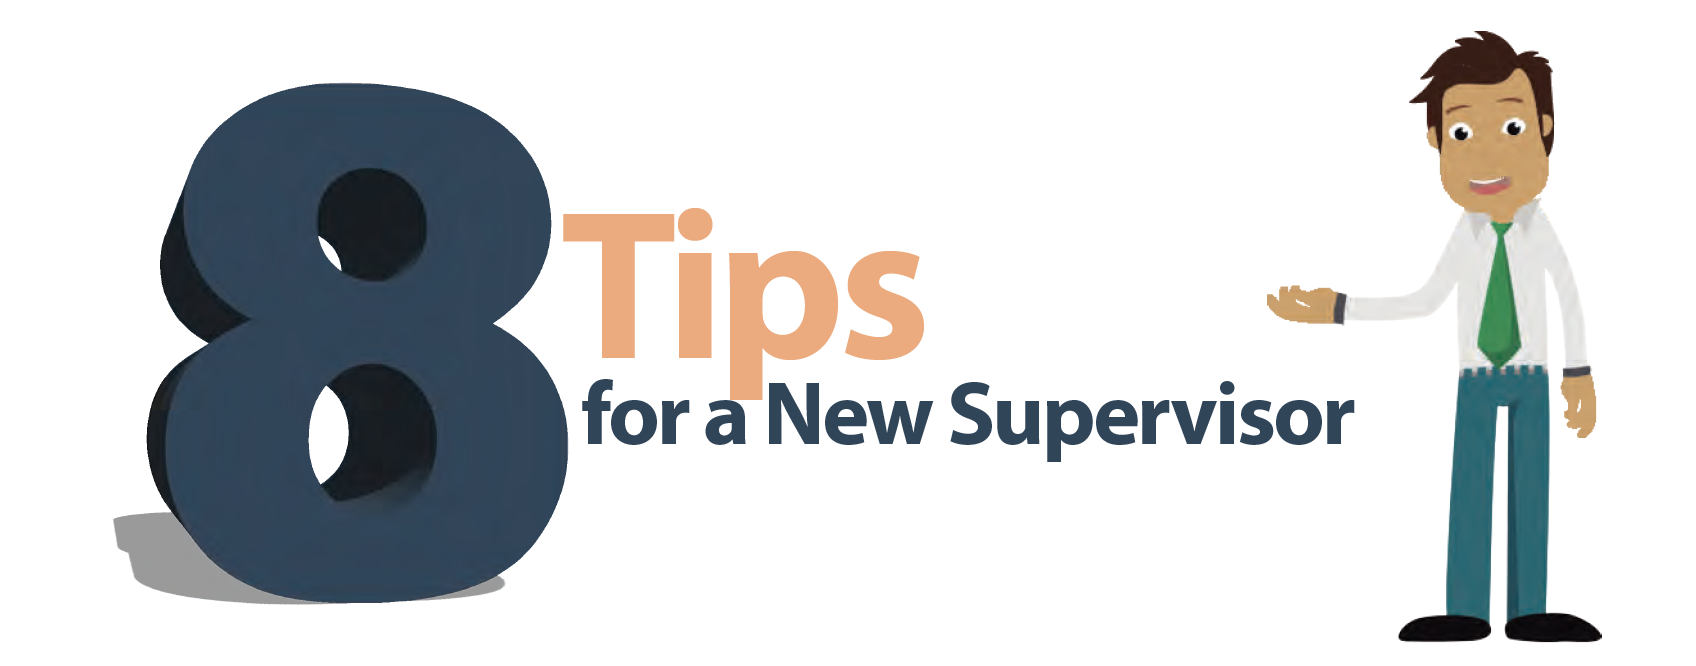 animated guy with 8 tips for a new supervisor